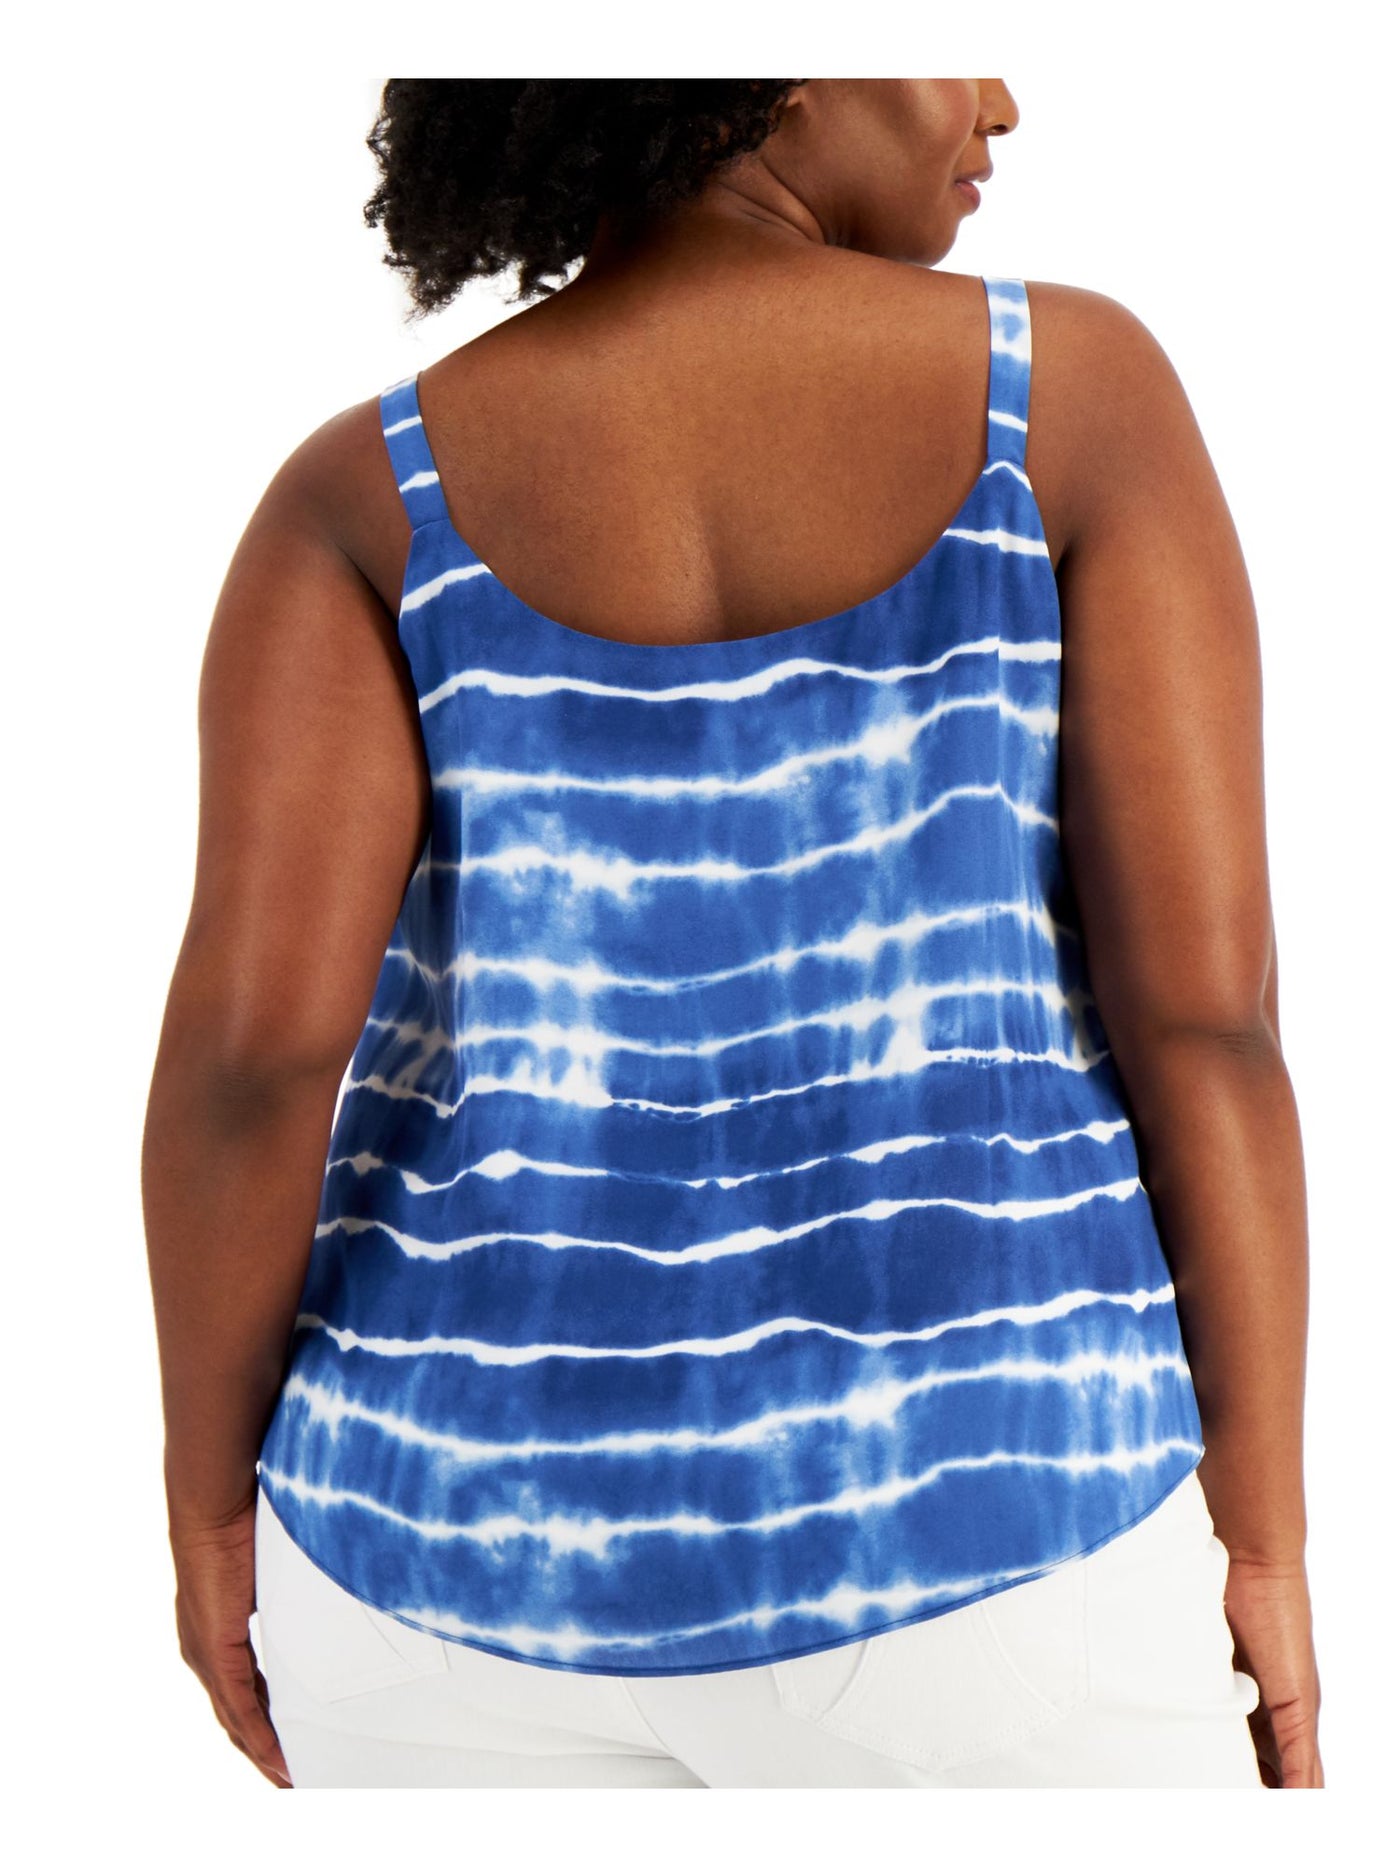 BAR III Womens Blue Darted Curved Hem Lined Tie Dye Sleeveless Scoop Neck Cami Top Plus 1X